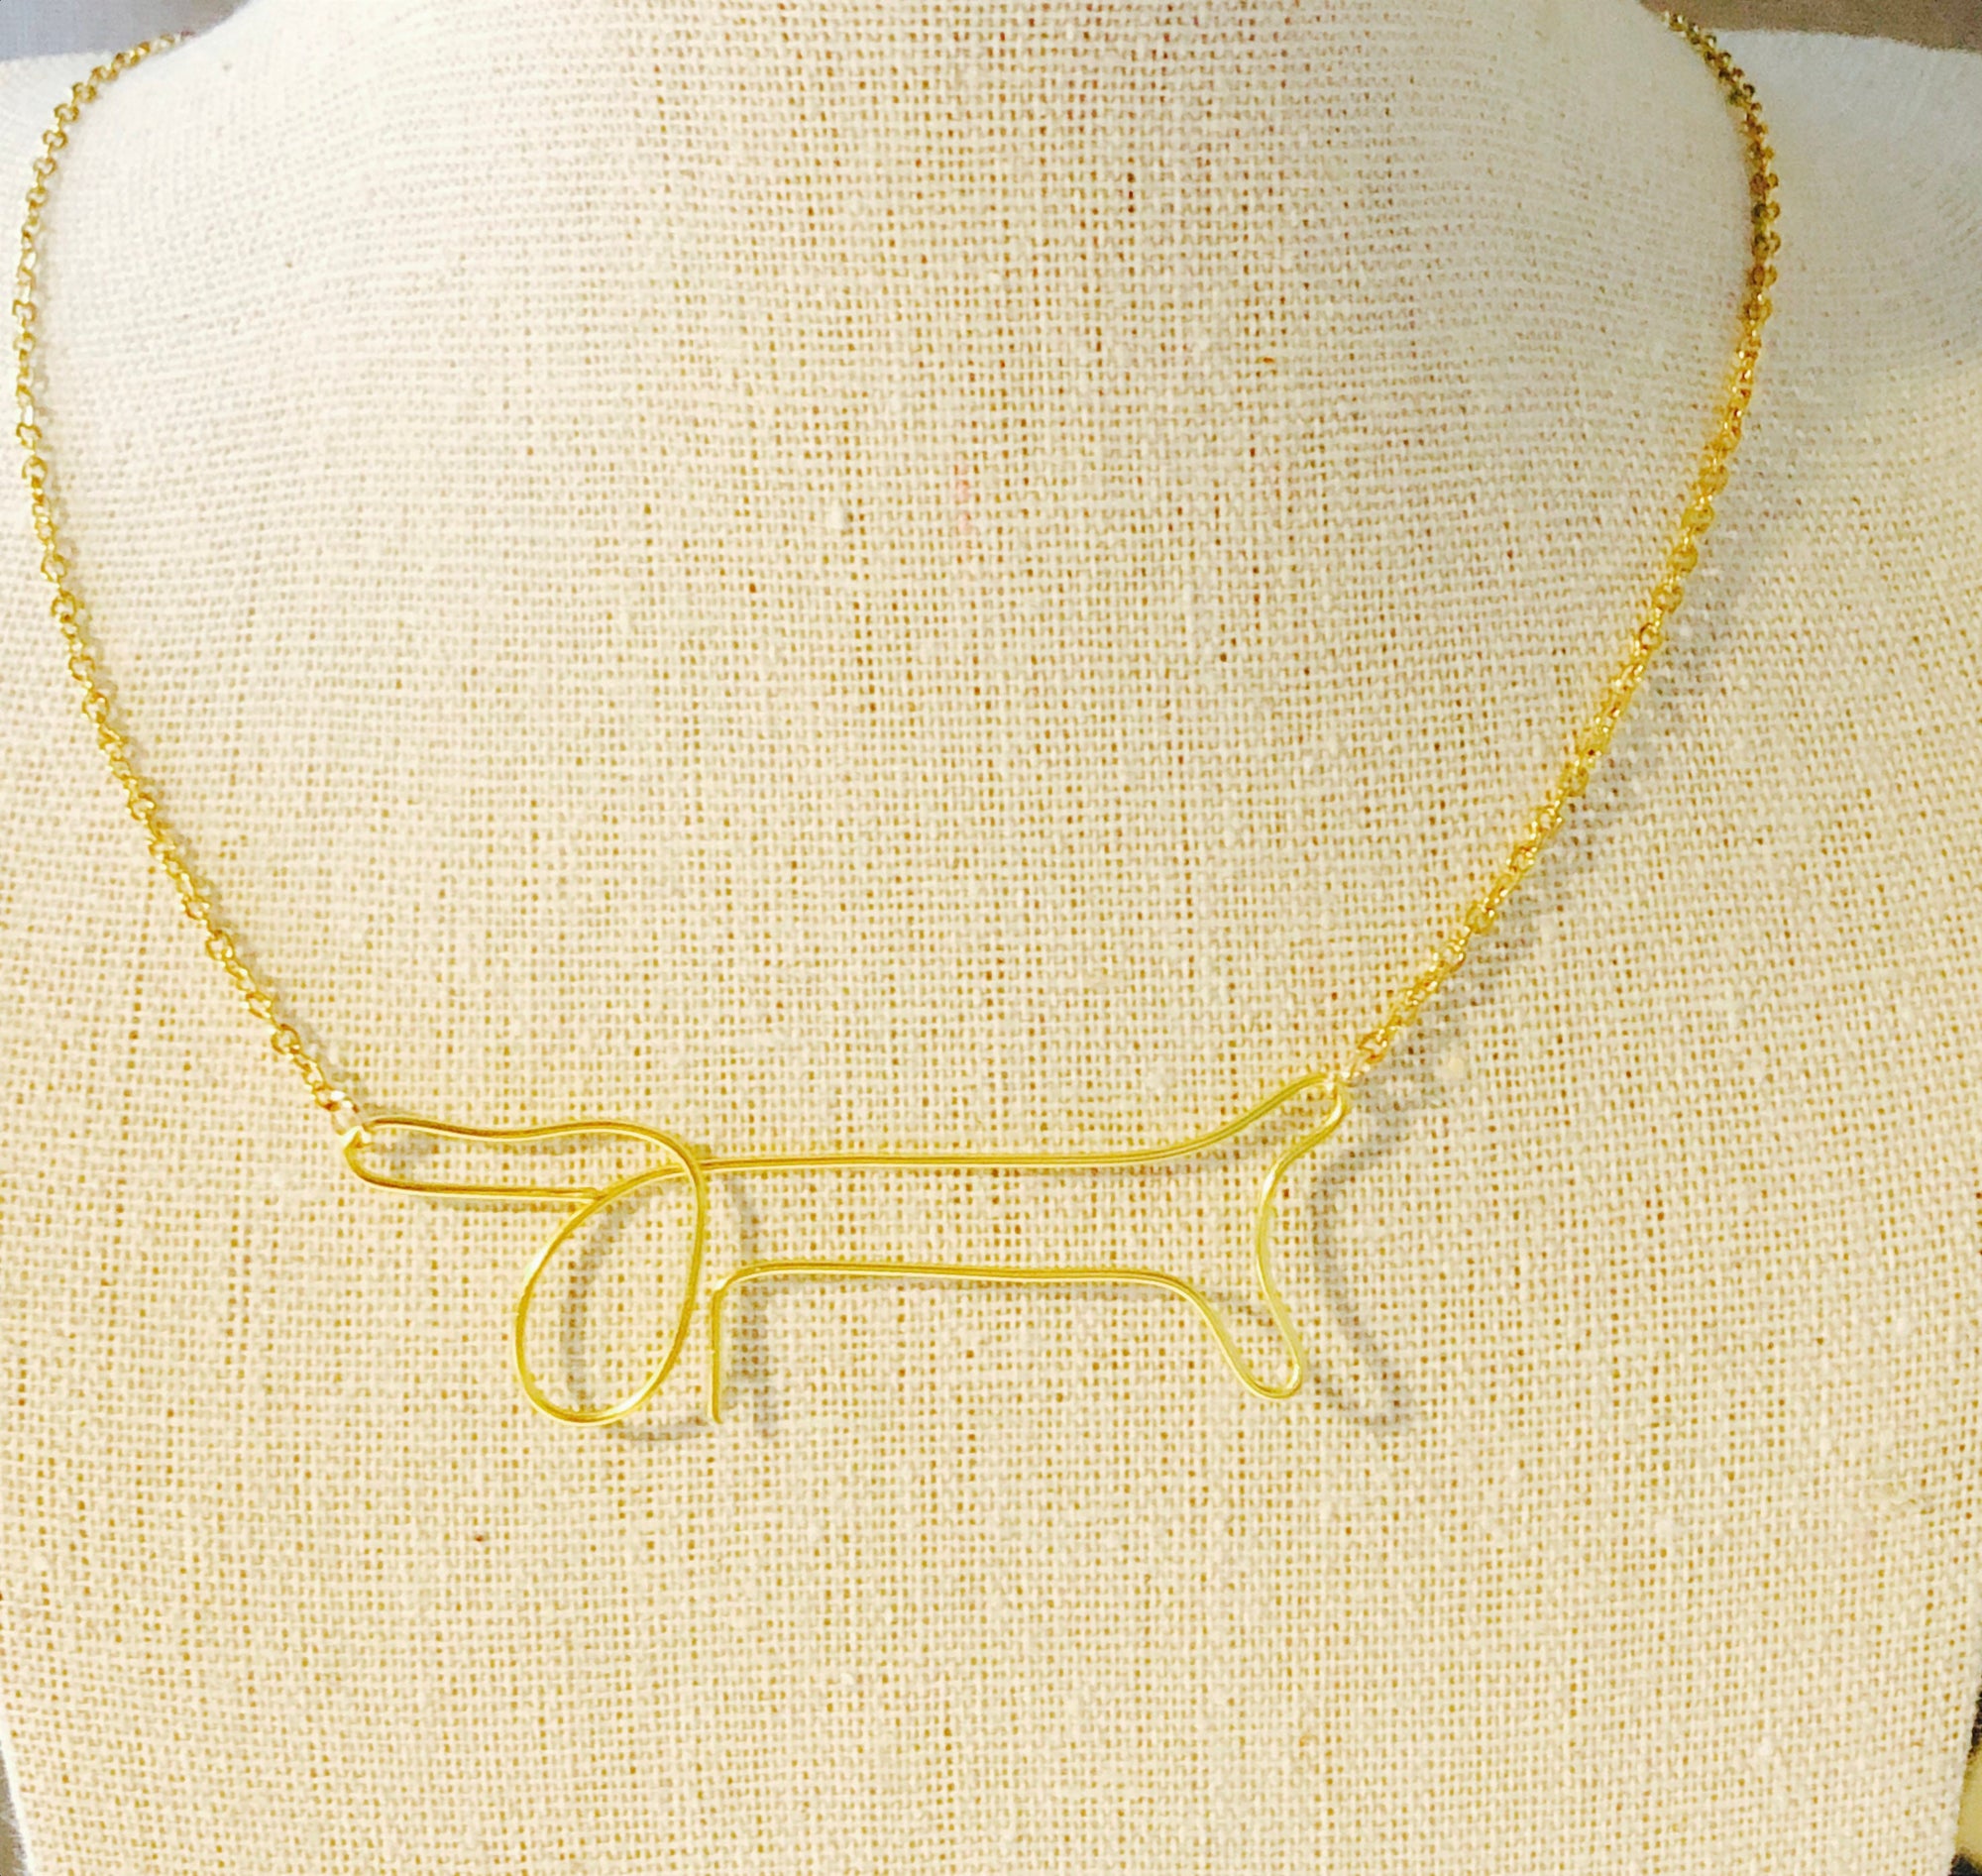 Gold Sausage dog dachshund gifts • Pablo Picasso doxie wearable art • Longhaired dachshund art • Picasso reproduction dachshund necklace